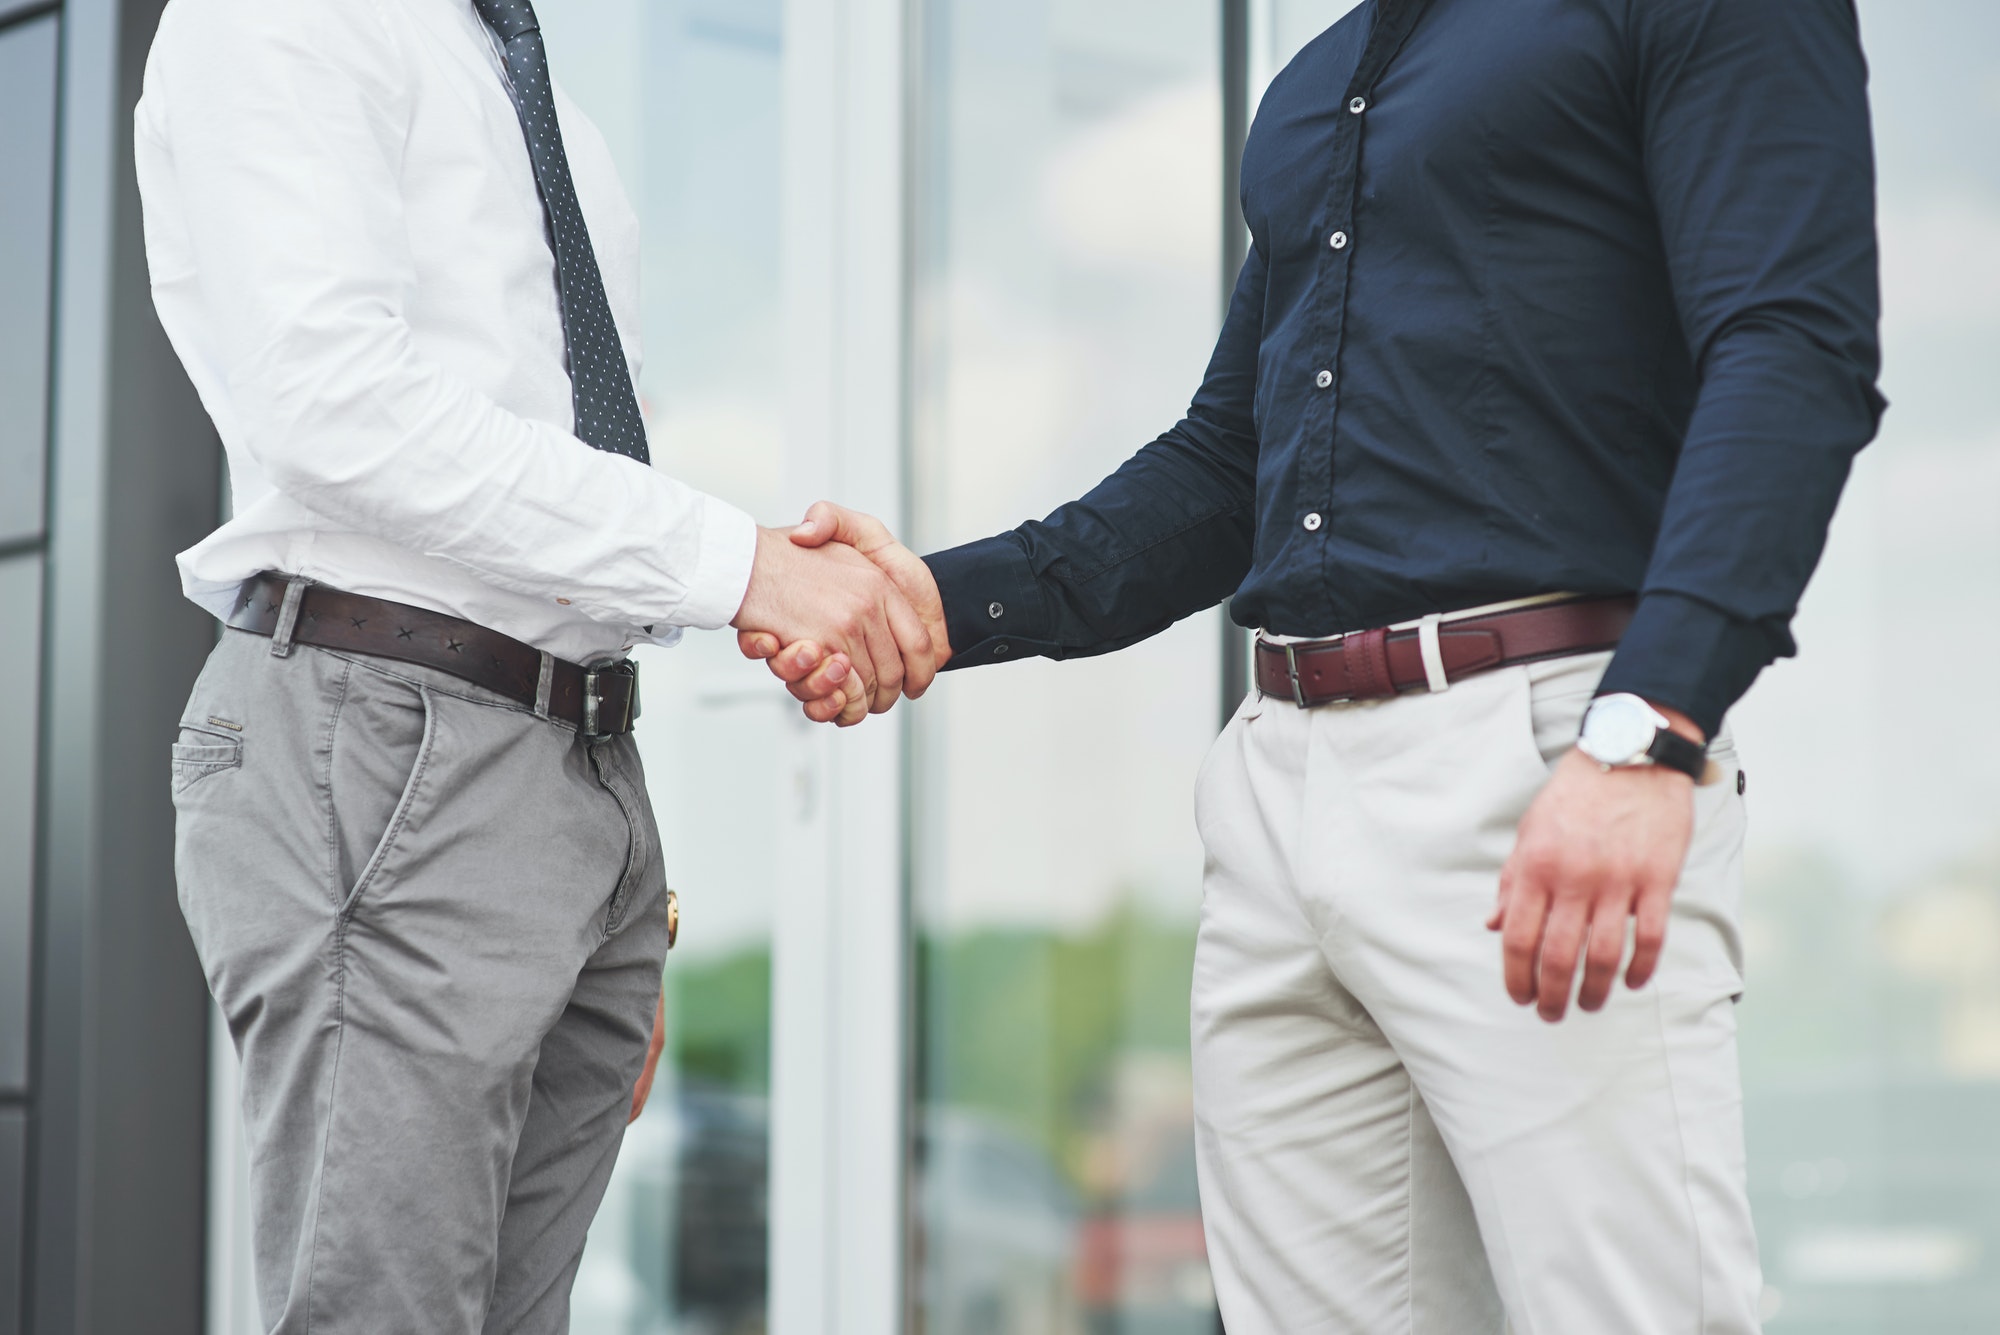 Handshake of two men. Successful business contacts after a good deal